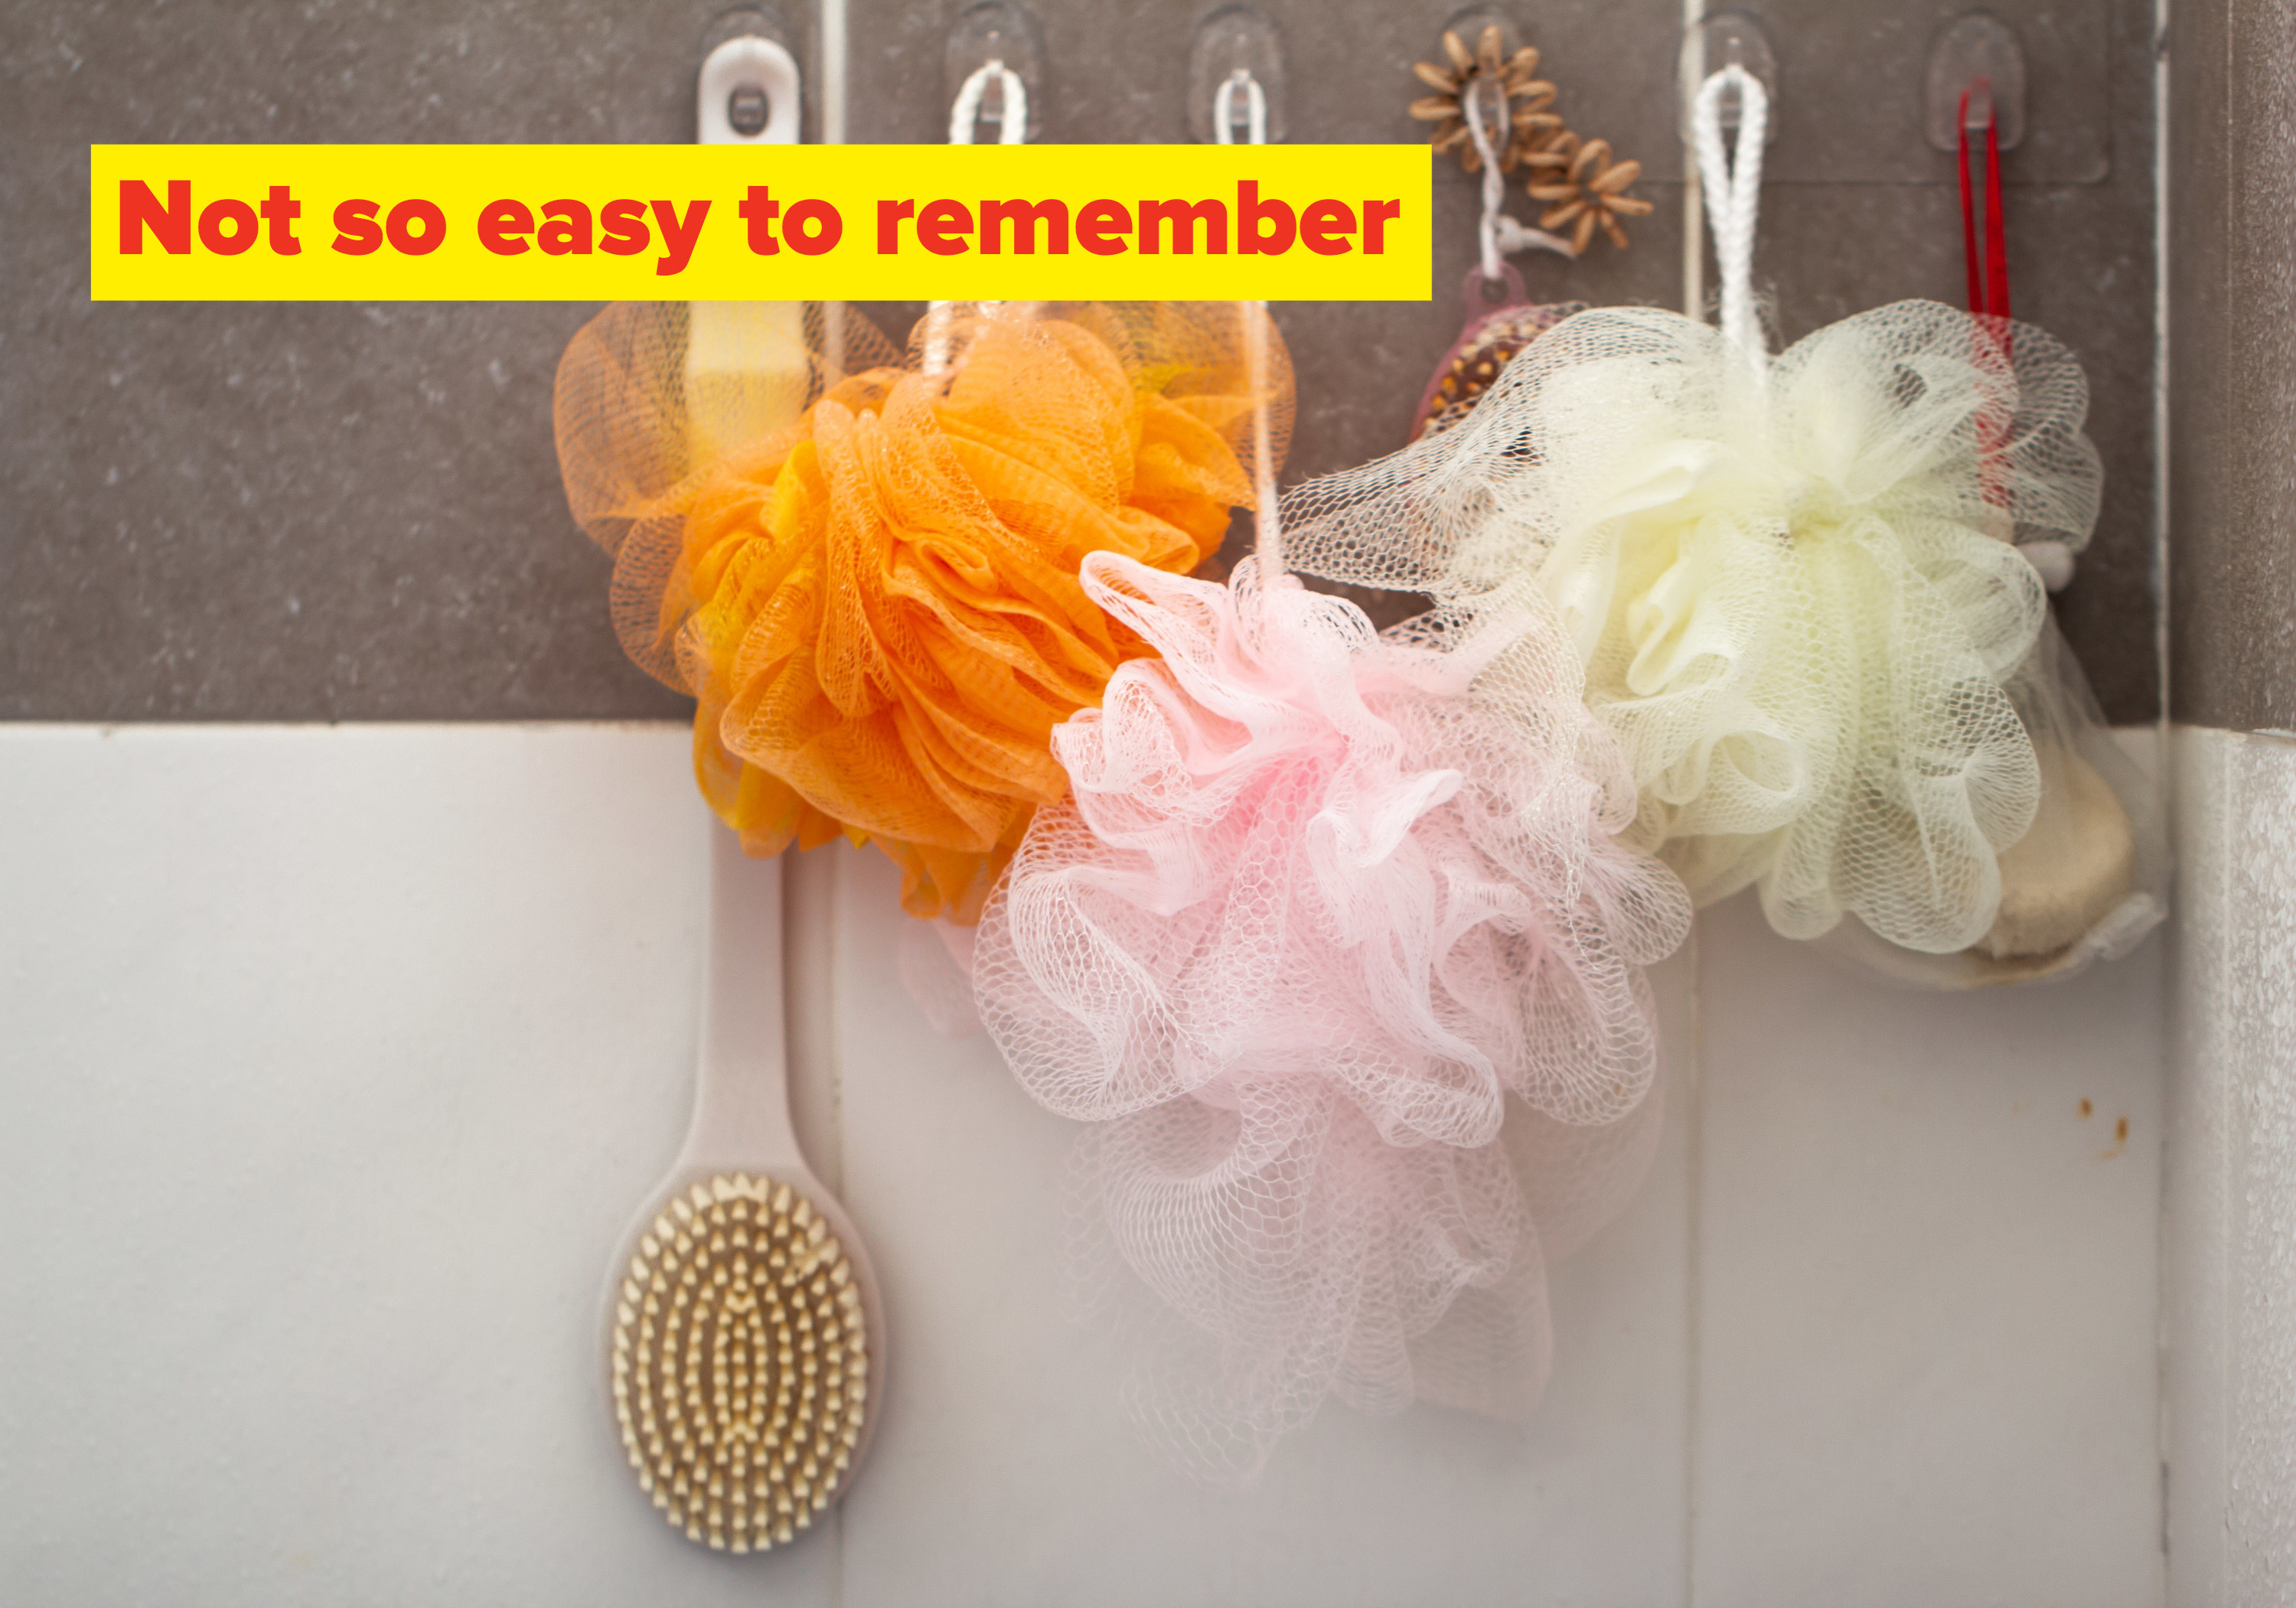 A back scrub brush hanging on a shower wall lined up next to three used bath poufs and two additional handheld scrubbers